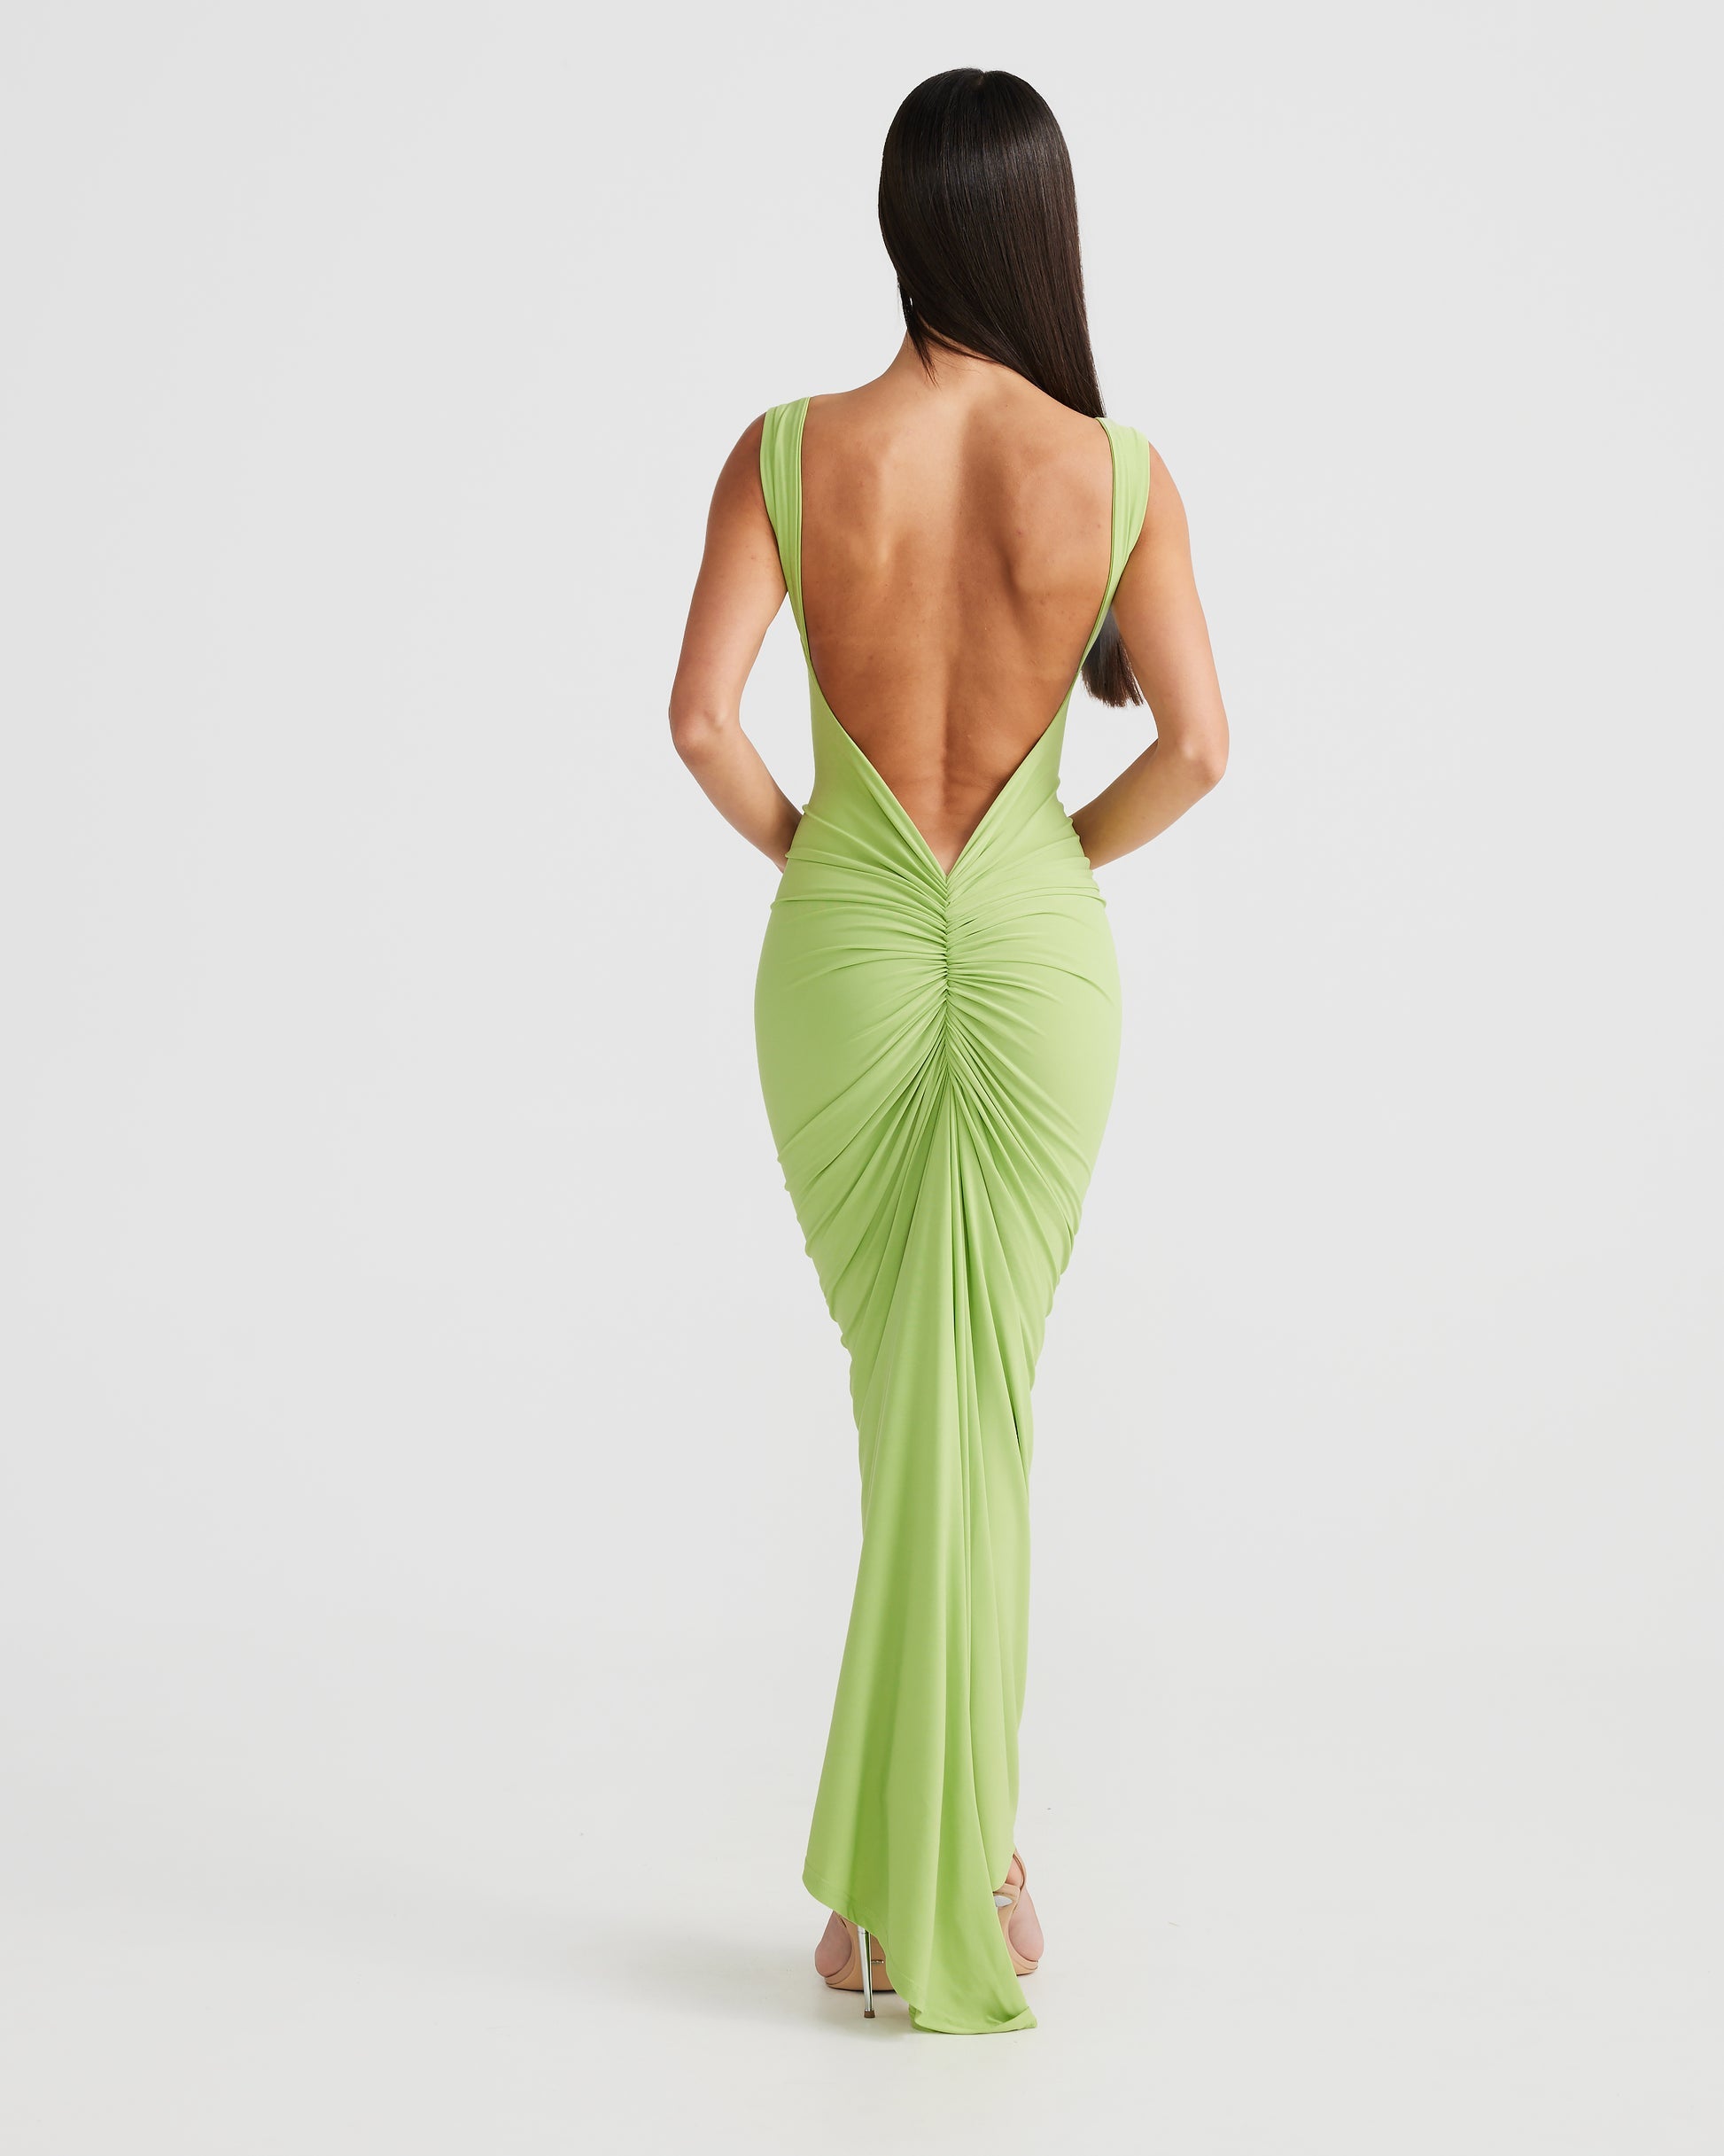 MÉLANI The Label SABIA Lime Ruched Bum Backless Dress